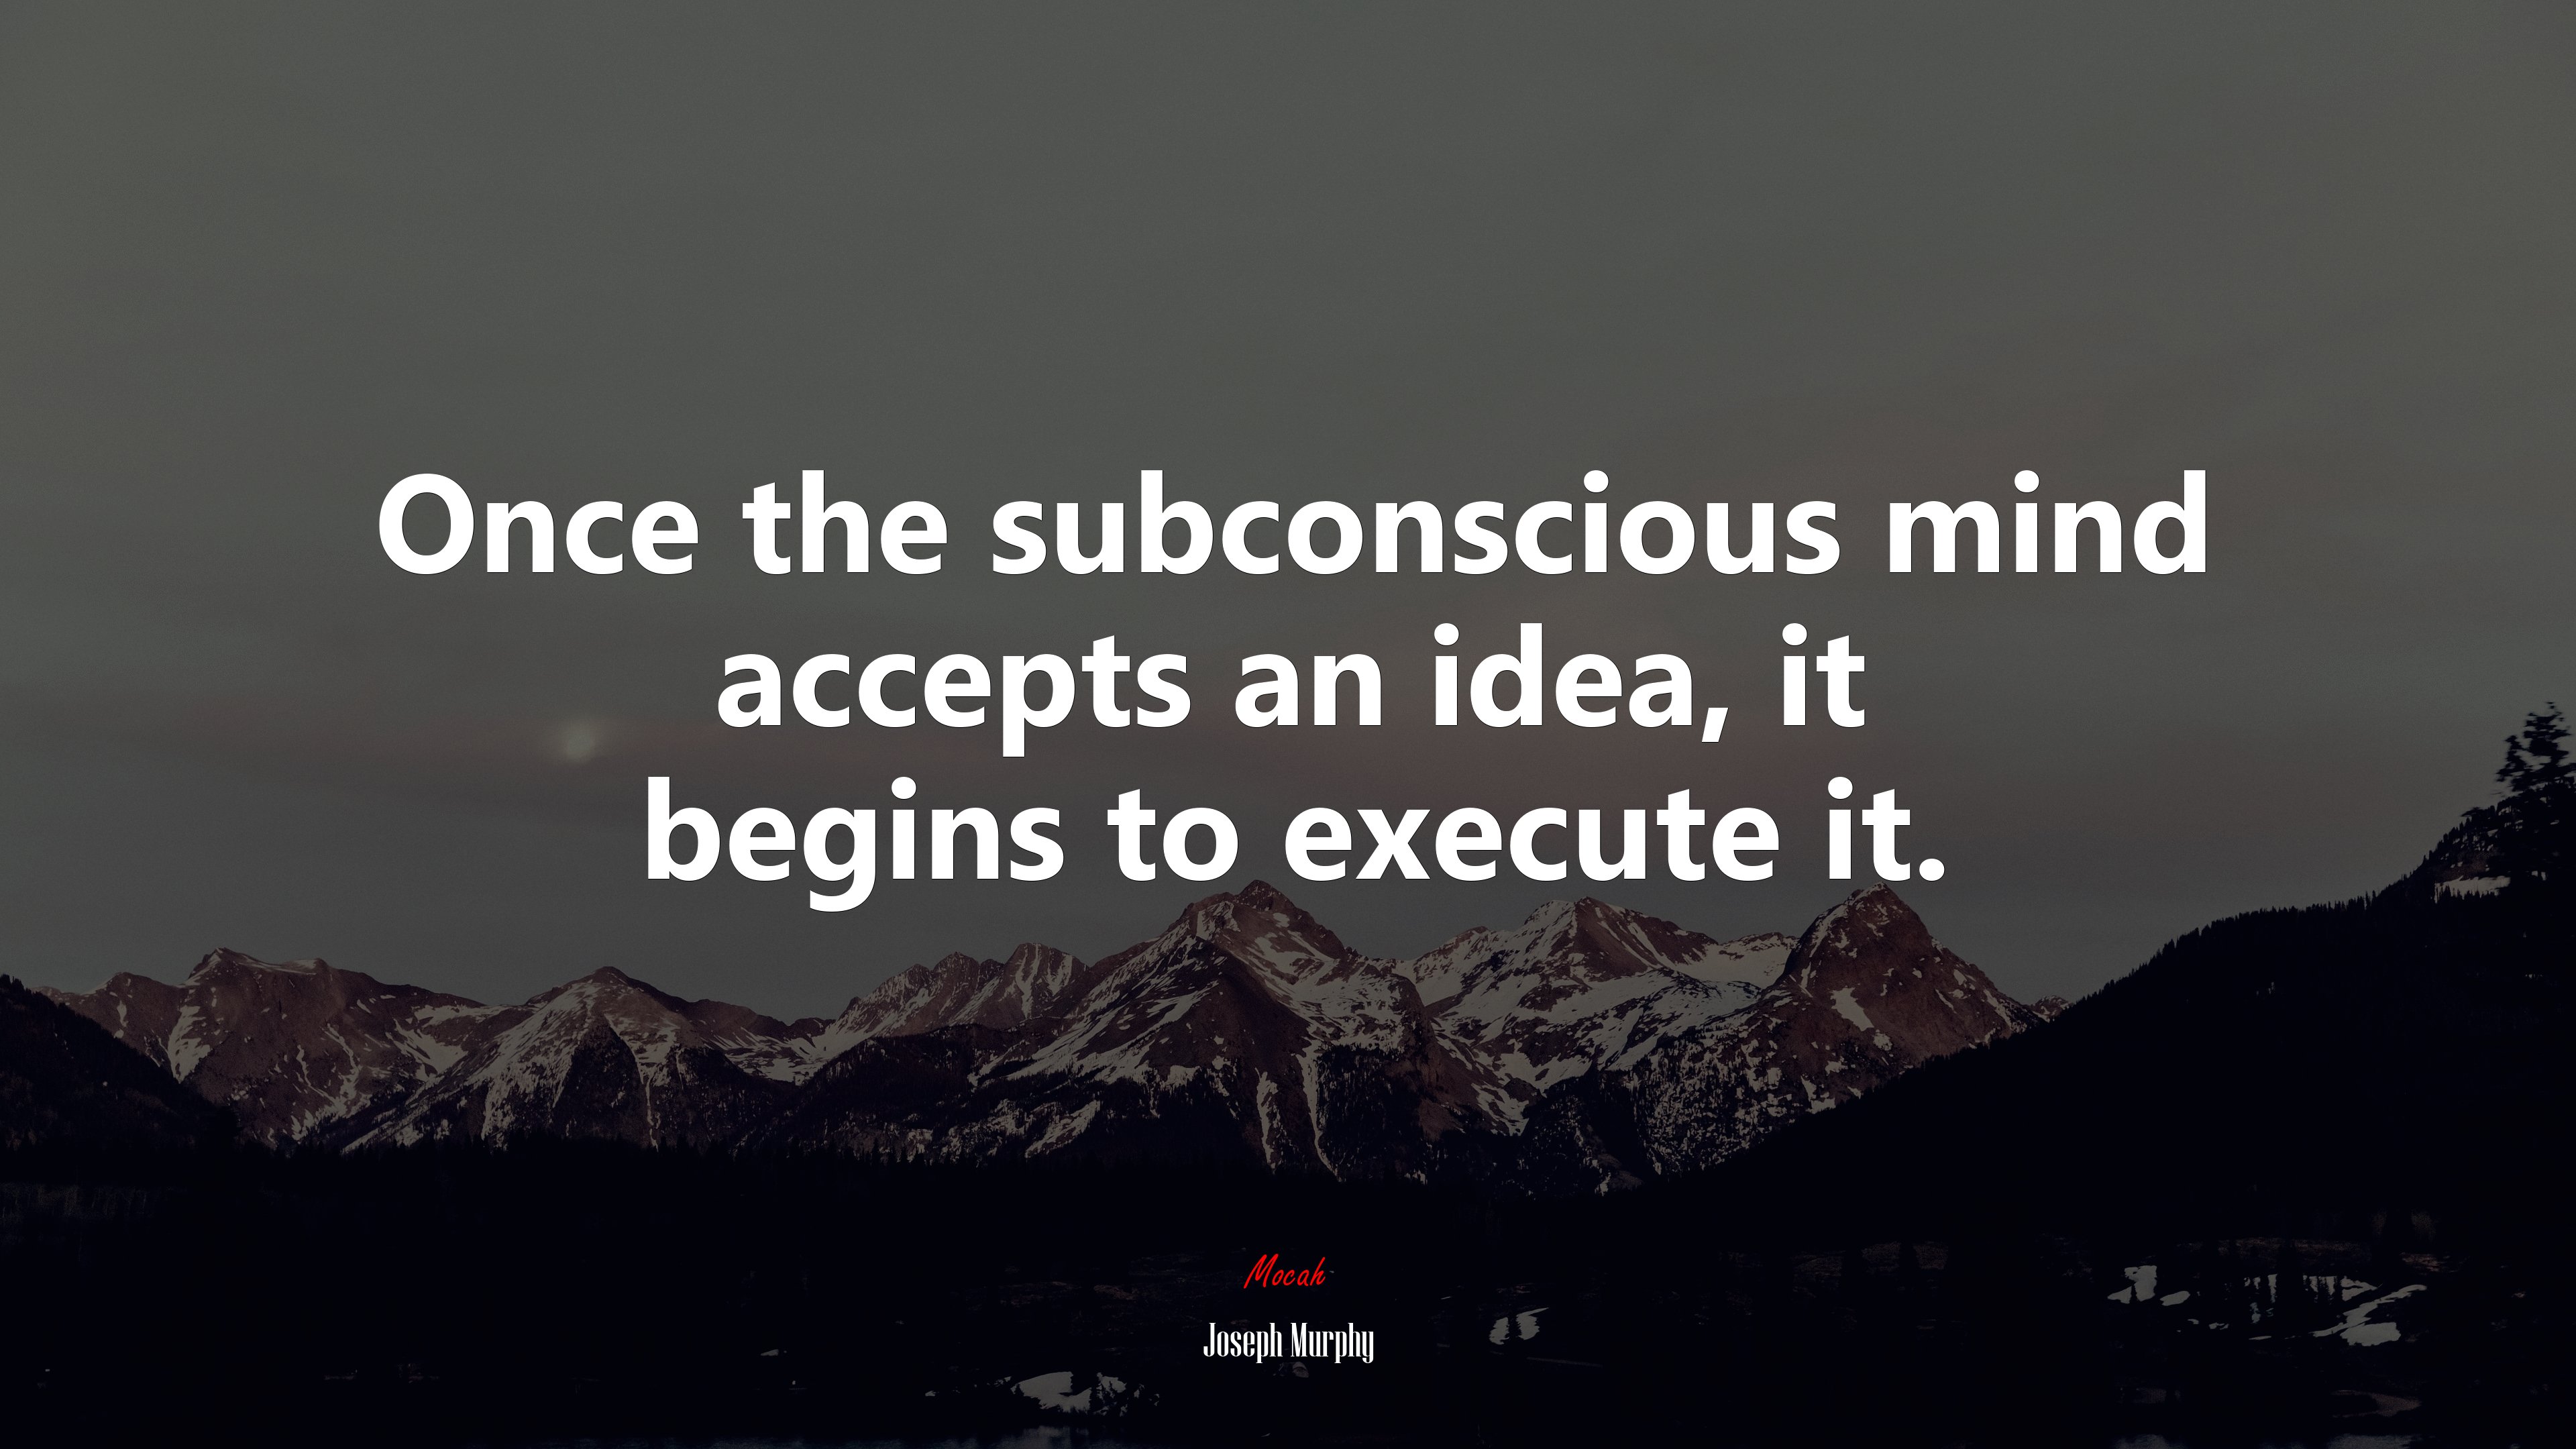 Once the subconscious mind accepts an idea, it begins to execute it. Joseph Murphy quote, 4k wallpaper HD Wallpaper